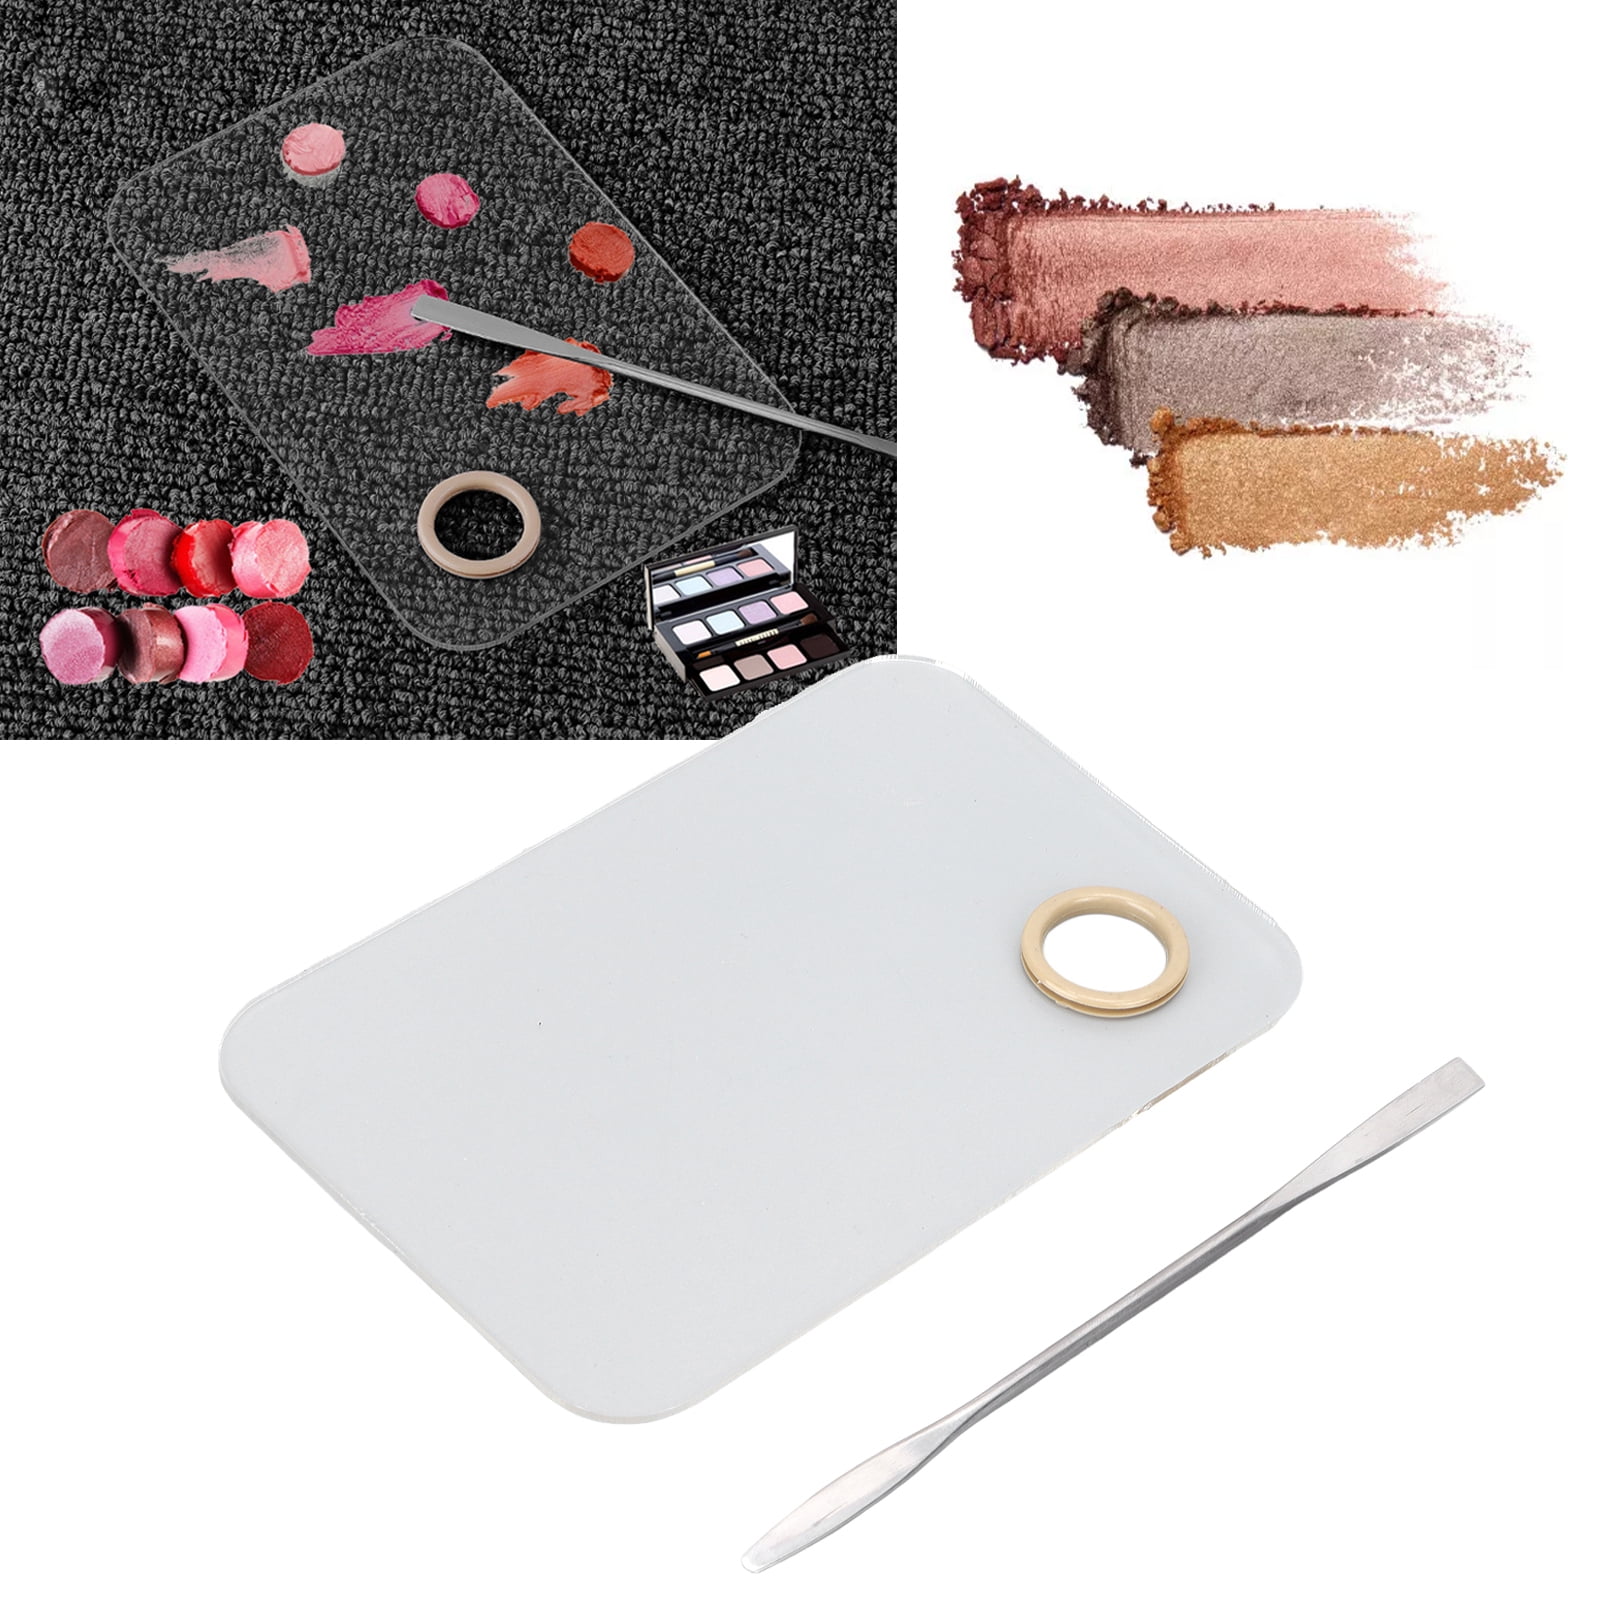 UMOYIT Makeup Mixing Palette with 1Pc Spatula and Hand Palette